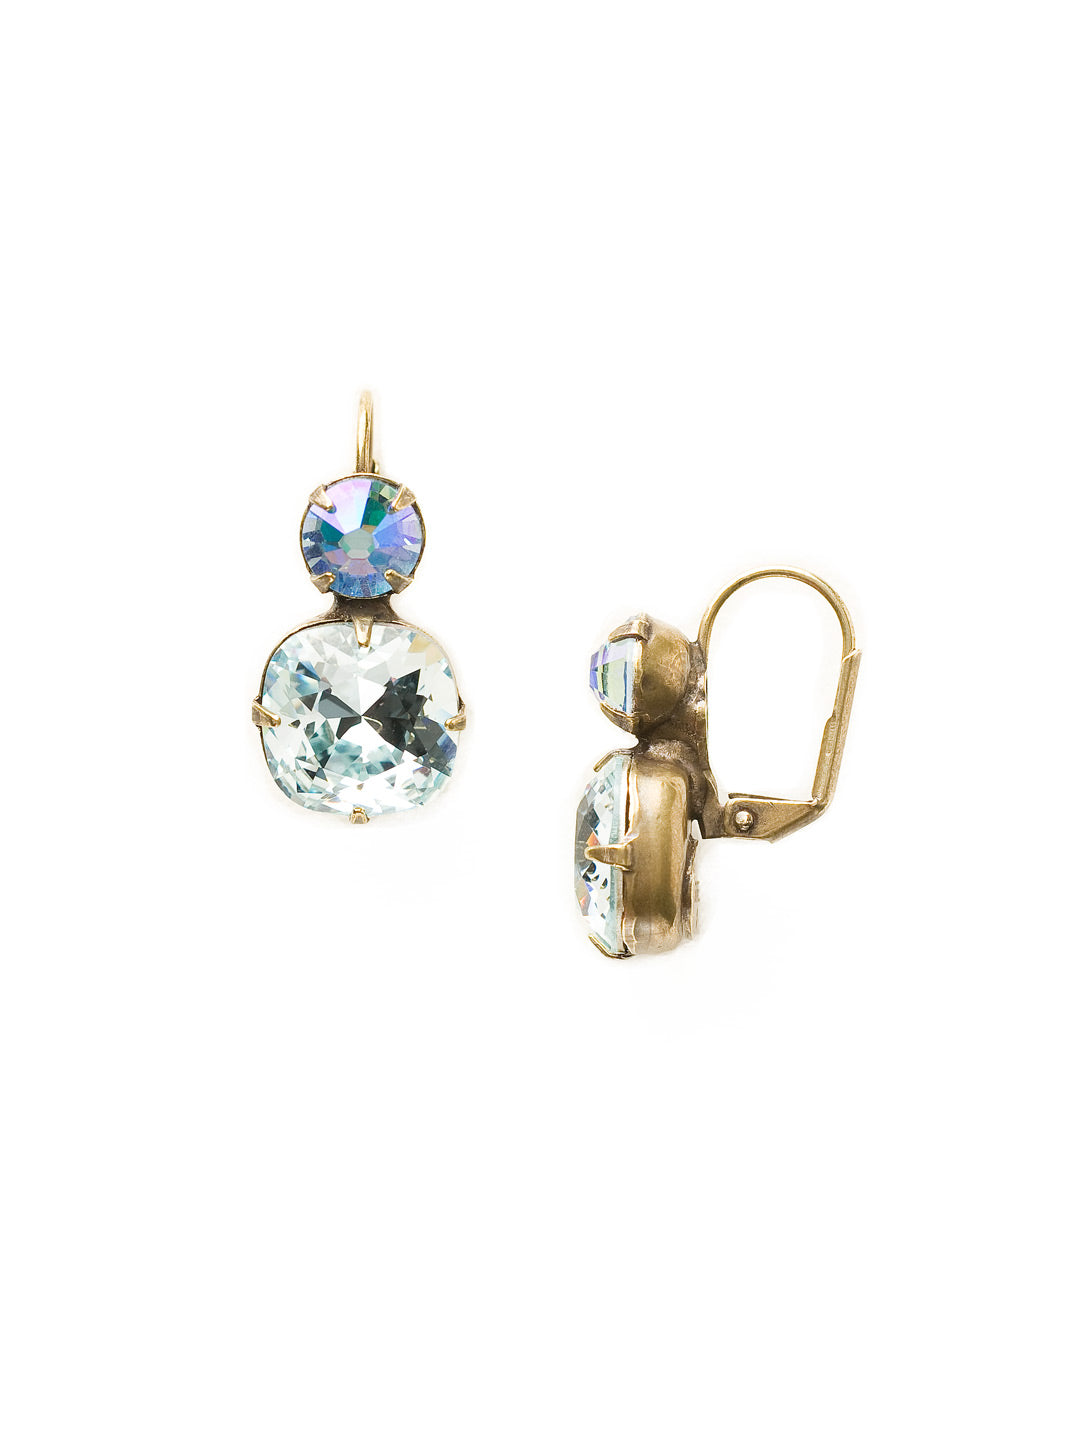 On The Edge Dangle Earrings - ECL4AGLAQ - <p>It's simple - round and cushion cut crystals on a french wire earring. These earrings go with anything! You can rest easy knowing you have the perfect go-to pair of earrings in your jewelry box. From Sorrelli's Light Aqua collection in our Antique Gold-tone finish.</p>